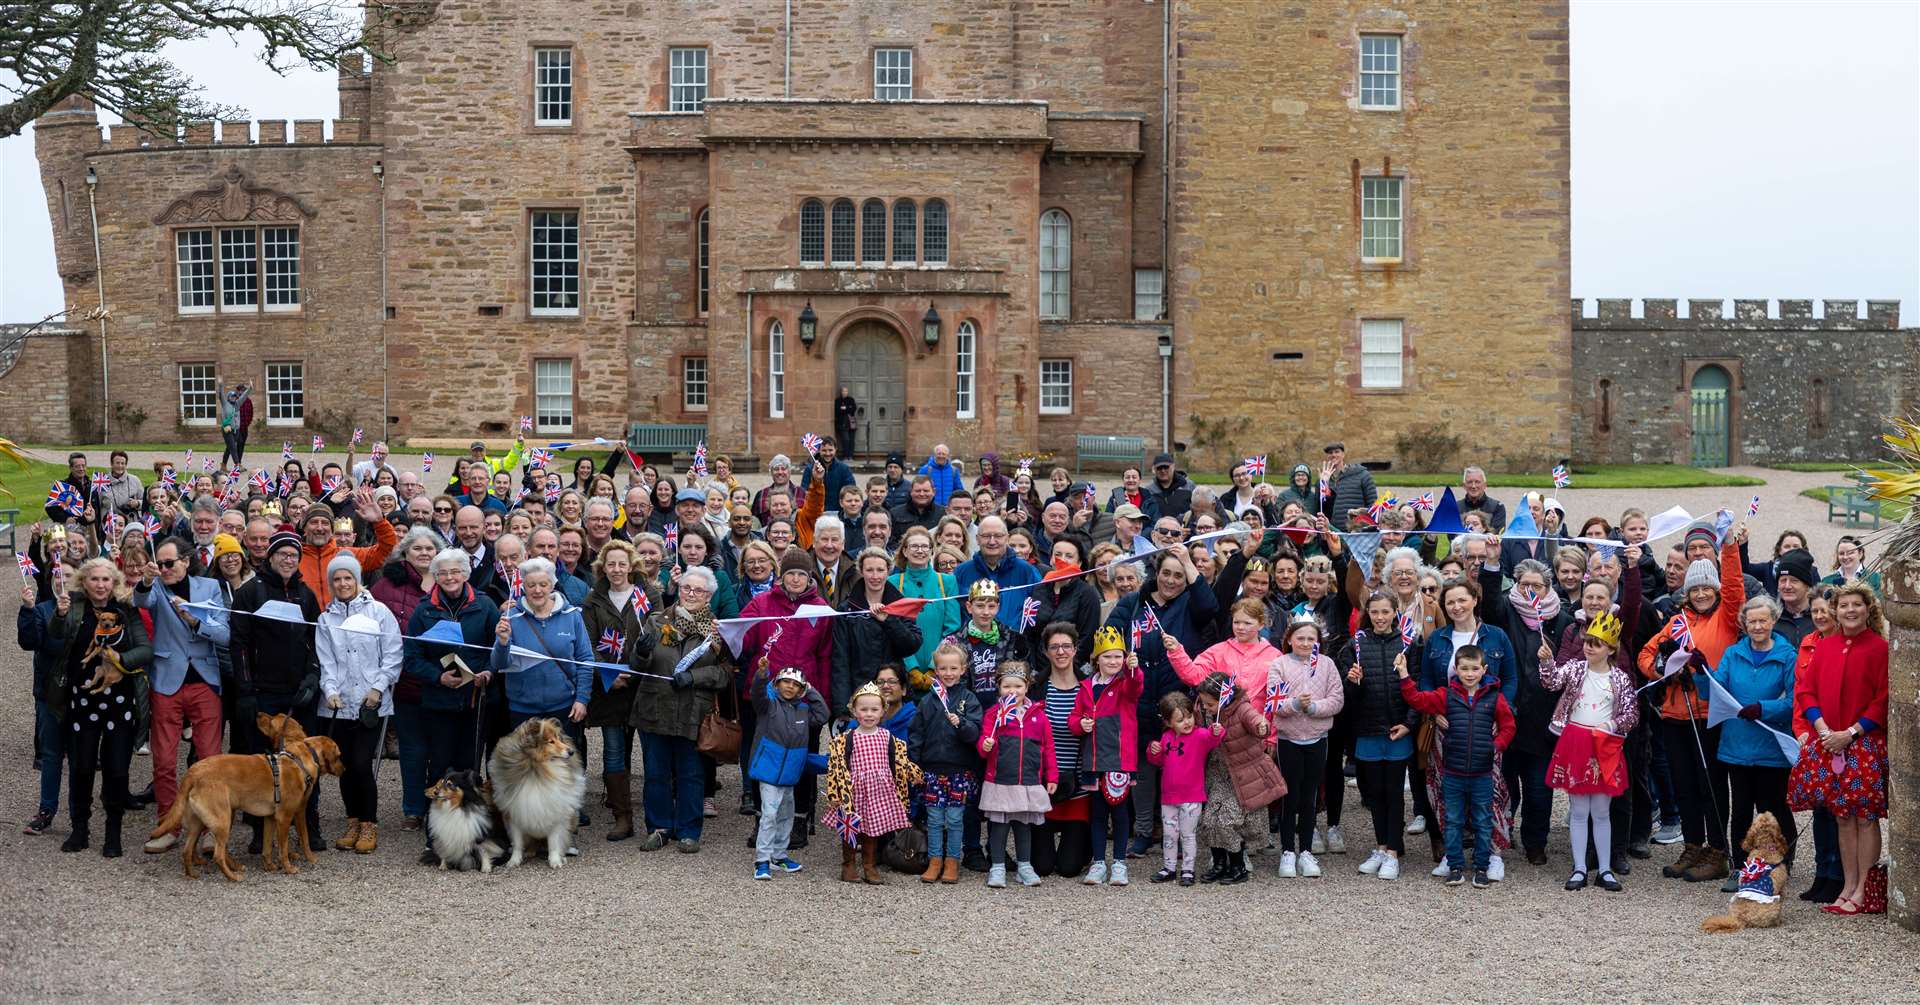 The original coronation picture was recreated at the Castle of Mey at the weekend